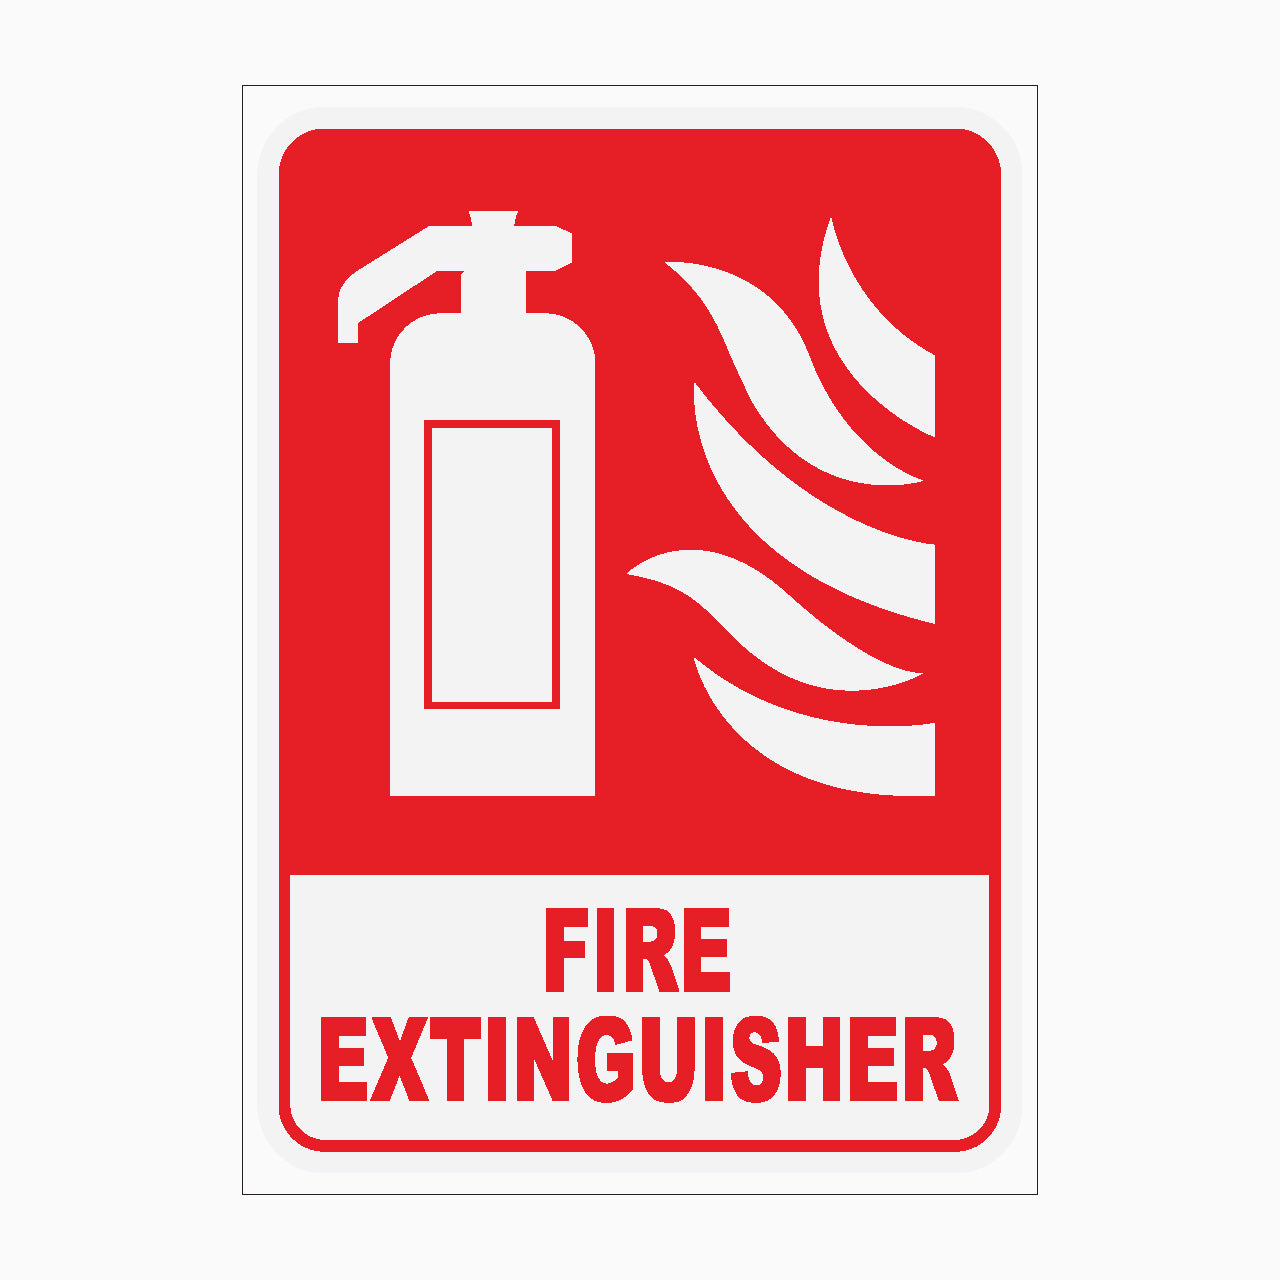 FIRE EXTINGUISHER SIGN - FIRE SAFETY SIGNS - BUY ONLINE - GET SIGNS